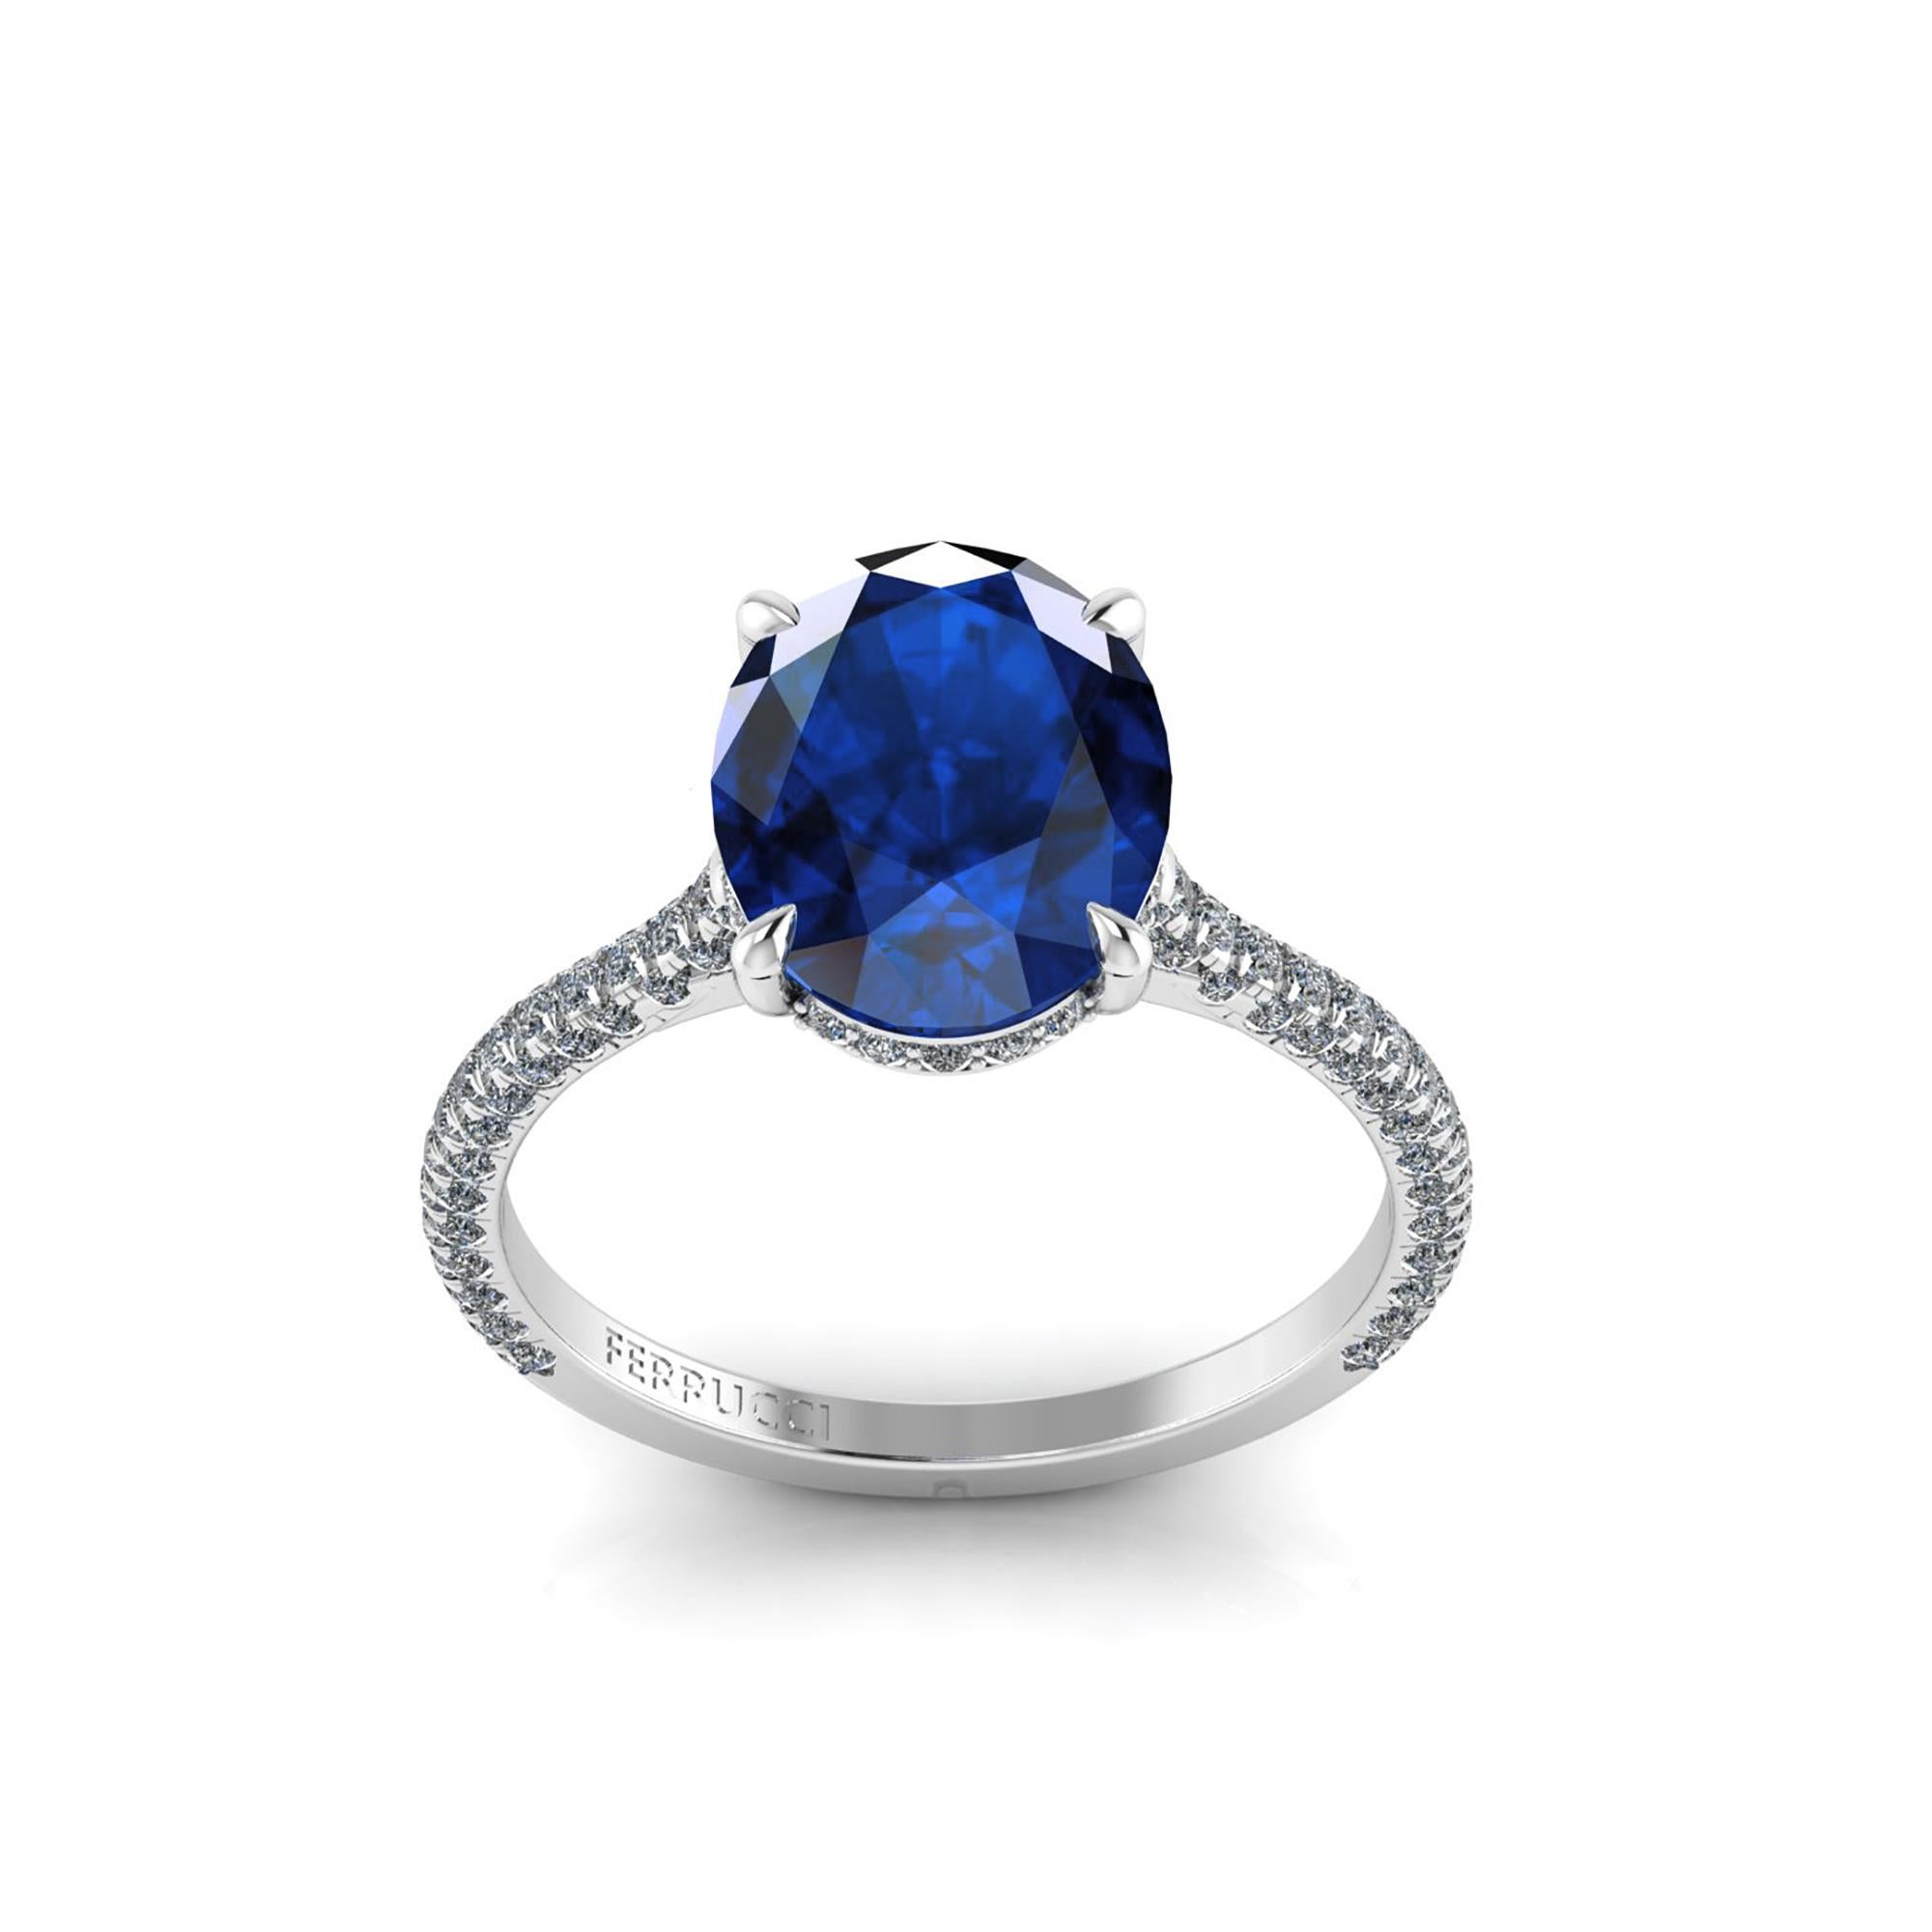 GIA Certified 3.55 carat from Madagascar, blue Oval Sapphire,  conceived in an hand made Platinum ring,
adorned with a shower of ultra white diamonds, hand set on almost every surface to give the maximum light reflection and sparkle.
The total carat